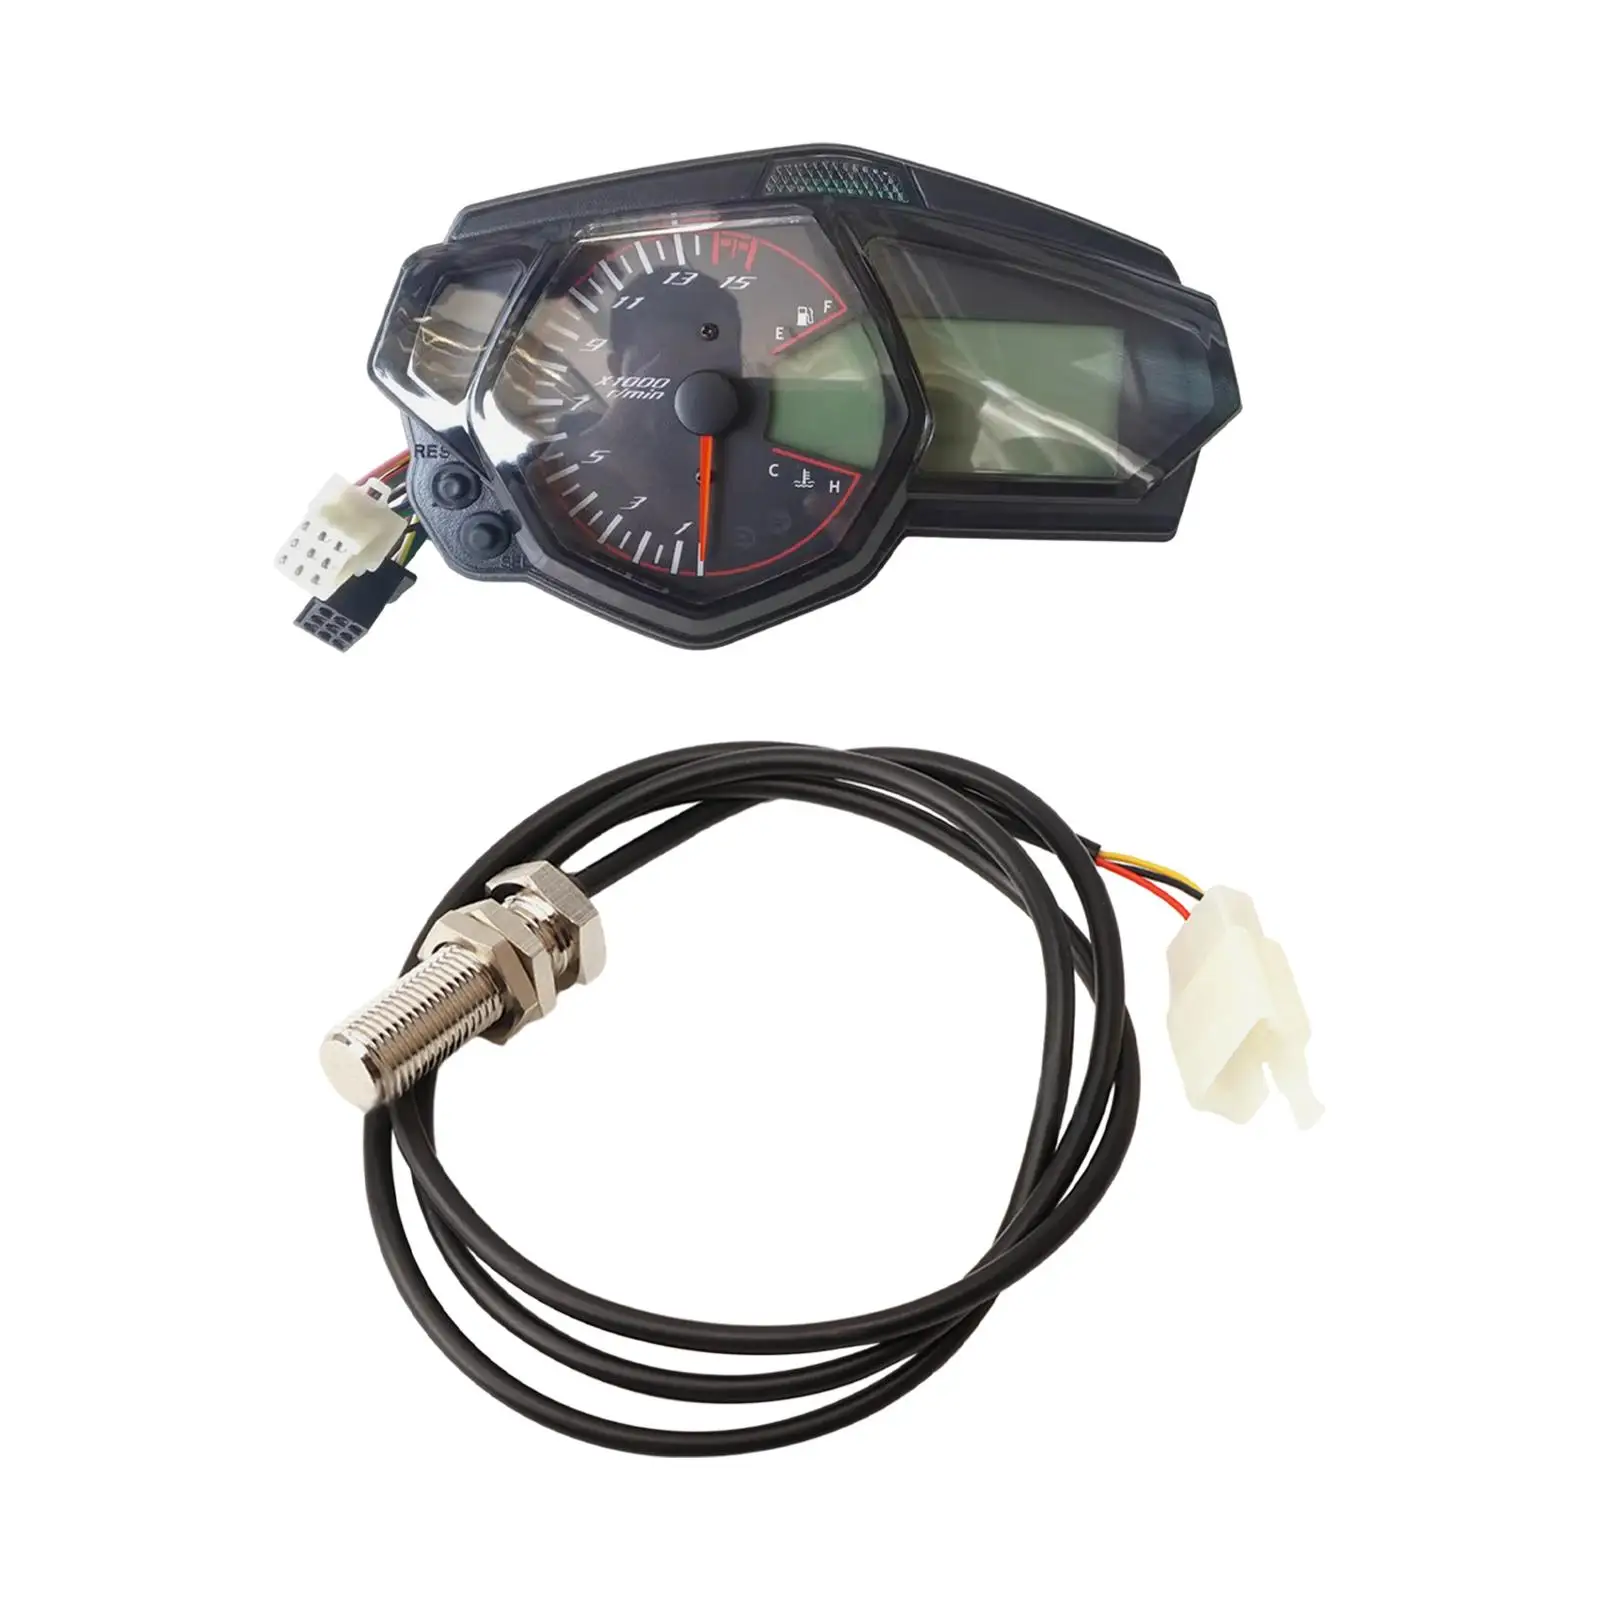 Motorcycle Speedometer Tachometer for Yamaha Yzf-r3 Yzf R3 High